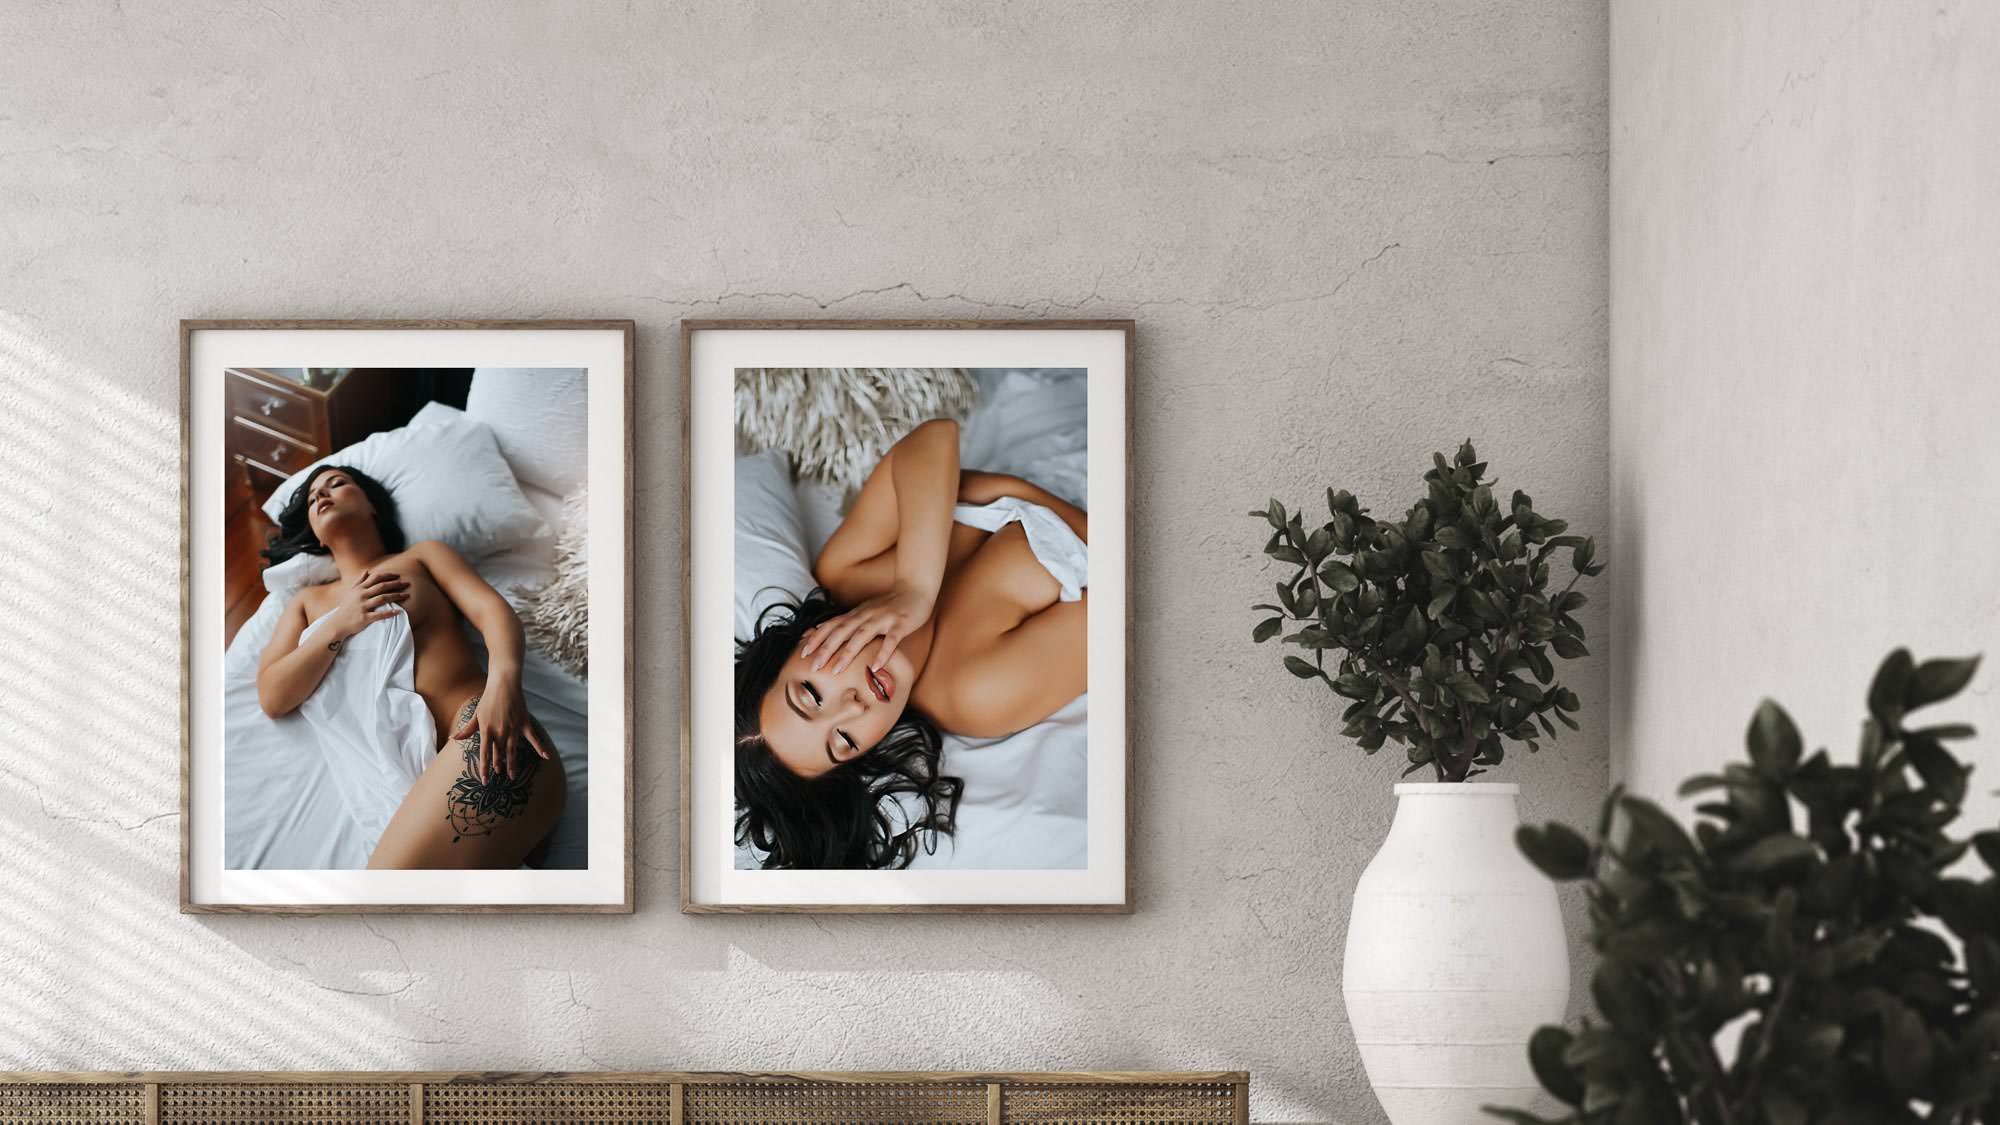 Boudoir products by Black Lace Boudoir in Washington D.C. Virginia, Maryland showcasing two large print wall art photos hanging on a wall.